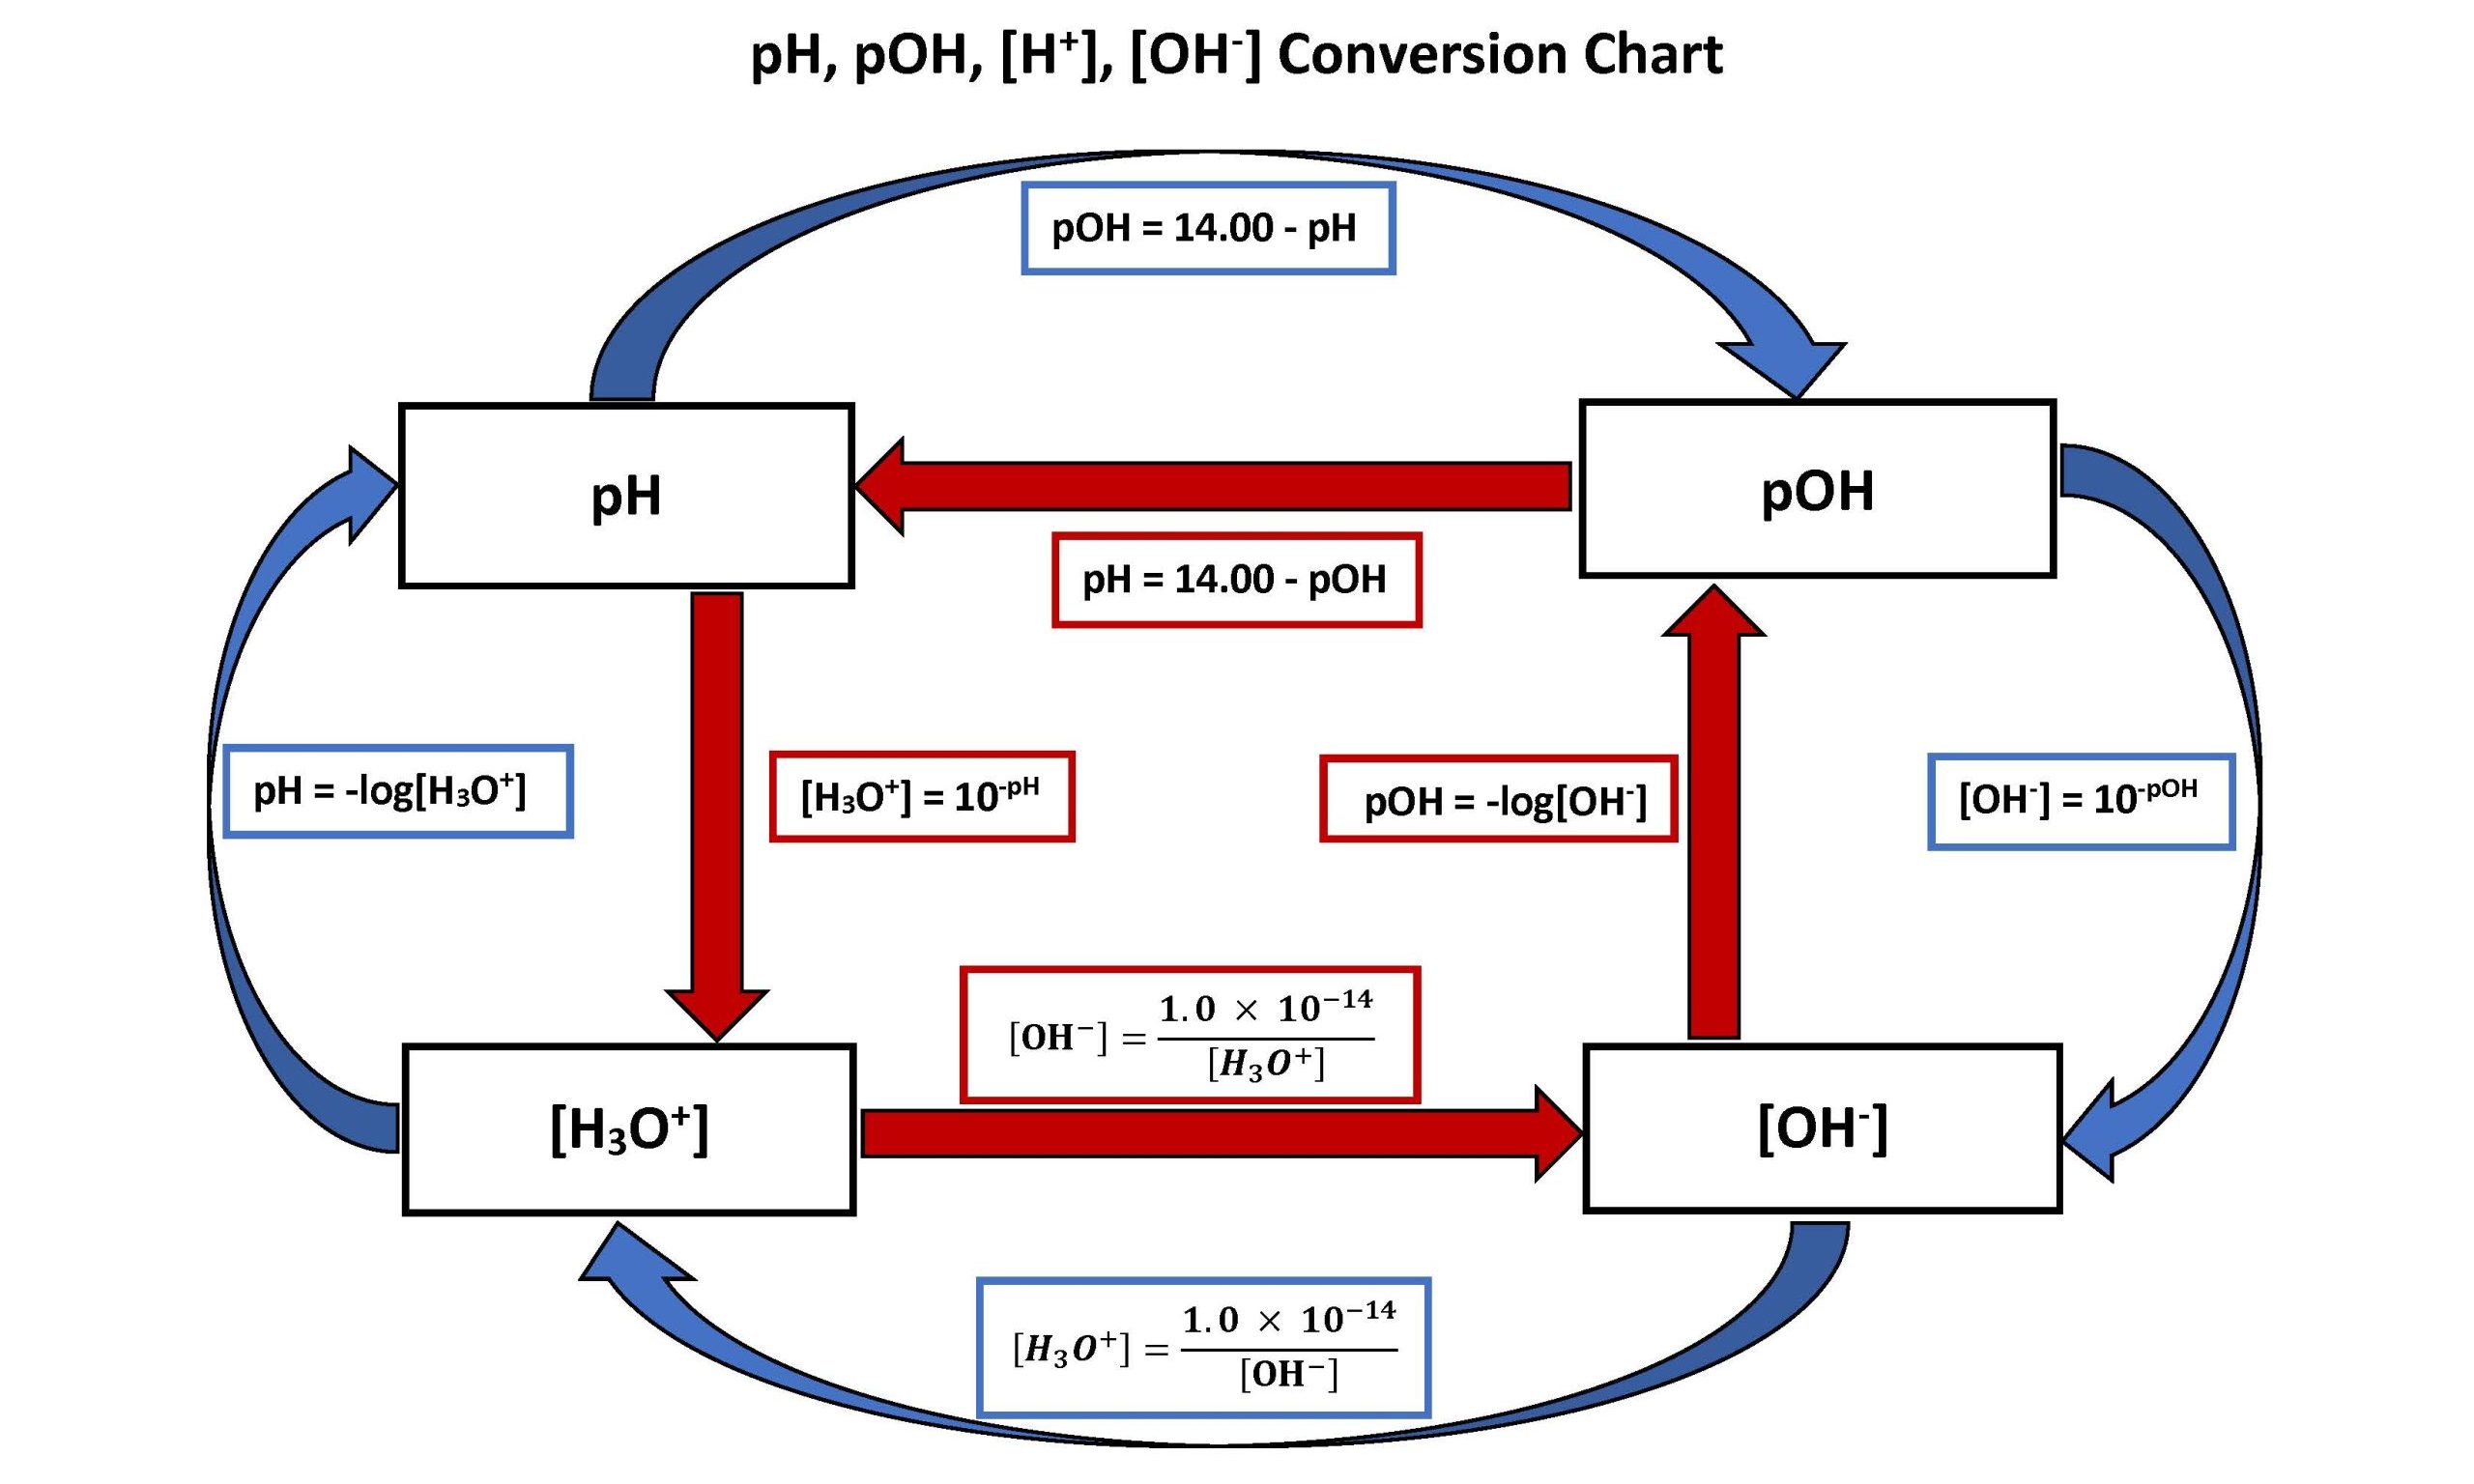 This flow chart diagram illustrates the various calculations/interrelationships between [H3O+], [OH−], pH, and pOH. 1. To find pH when given pOH use: pH = 14 - pOH. 2. To find pOH when given pH use: pOH = 14 - pH 3. To find pH when given [H3O+] use: pH = -log[H3O+] 4. To find pOH when given [OH-] use: pOH = -log[OH-] 5. To find [H3O+] when given pH use: [H3O+] = 10^-pH. 6. To find [OH-] when given pOH use: [OH-] = 10^-pOH. 7. To find [H3O+] when given [OH-] use: [H3O+] = 1.0x10^-14 / [OH-] 8. To find [OH-] when given [H3O+] use: [OH-] = 1.0x10^-14 / [H3O+]